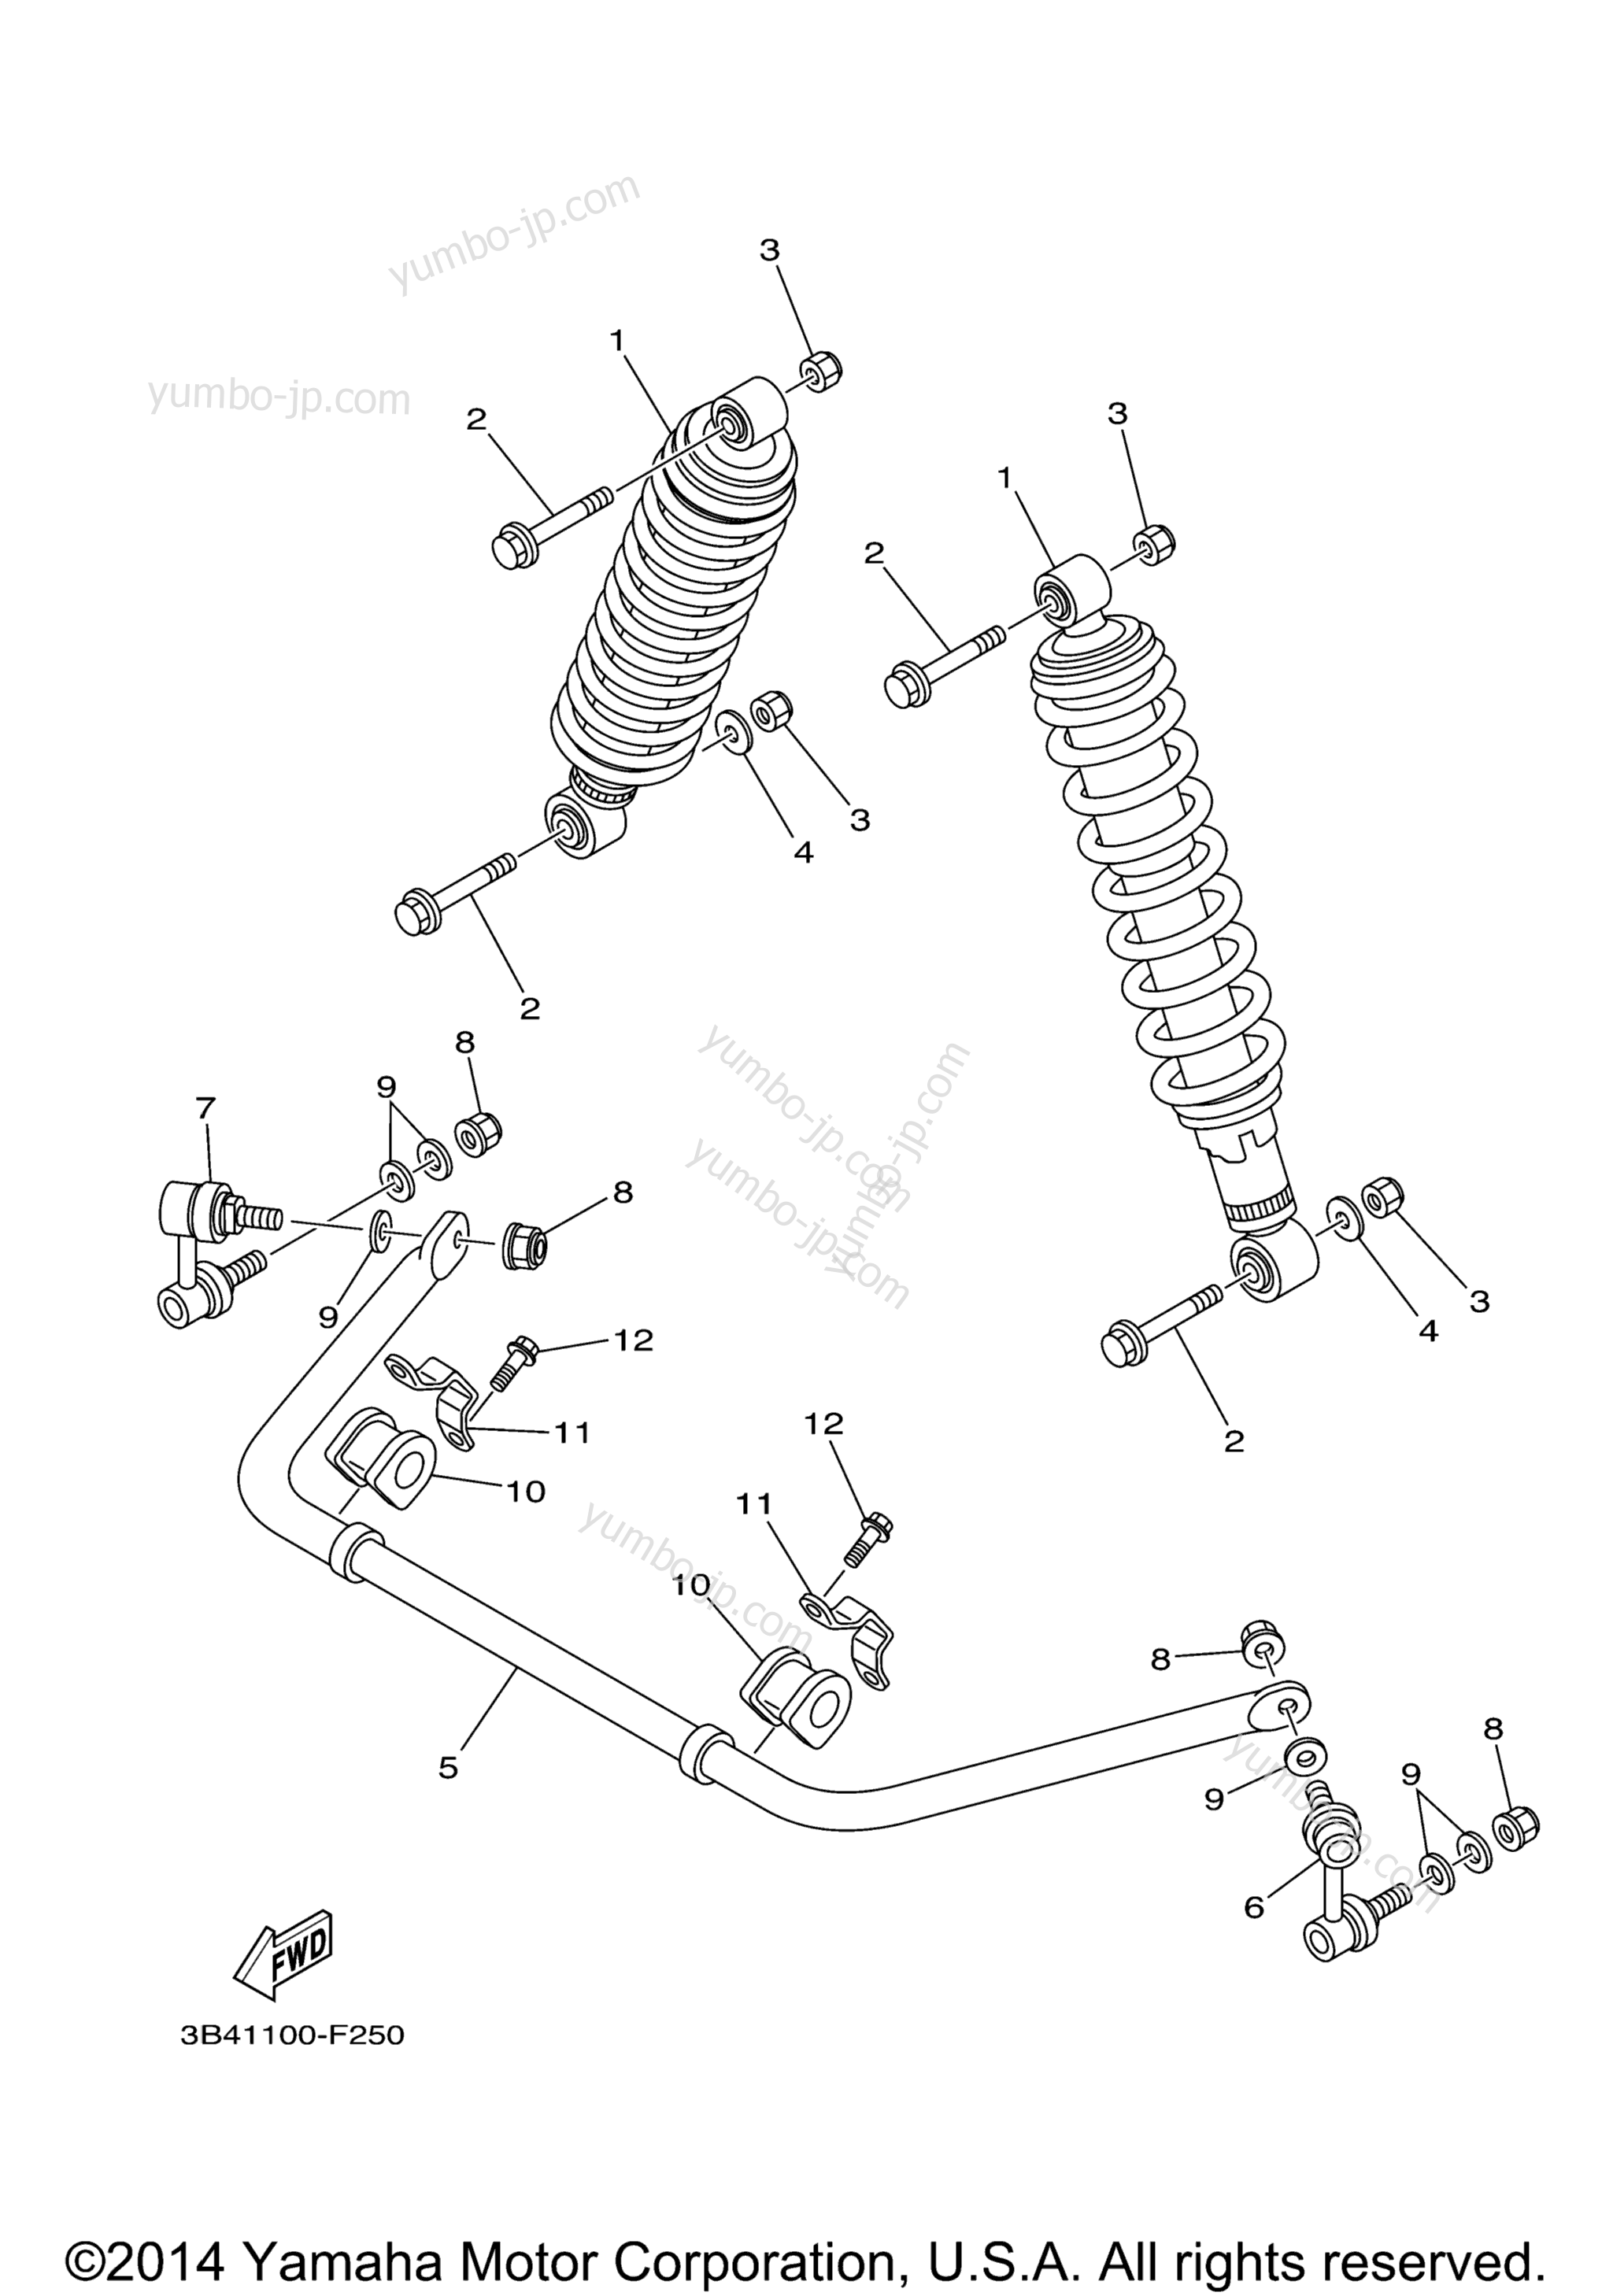 Rear Suspension for ATVs YAMAHA GRIZZLY 550 FI 4WD (YFM5FGYB) 2009 year